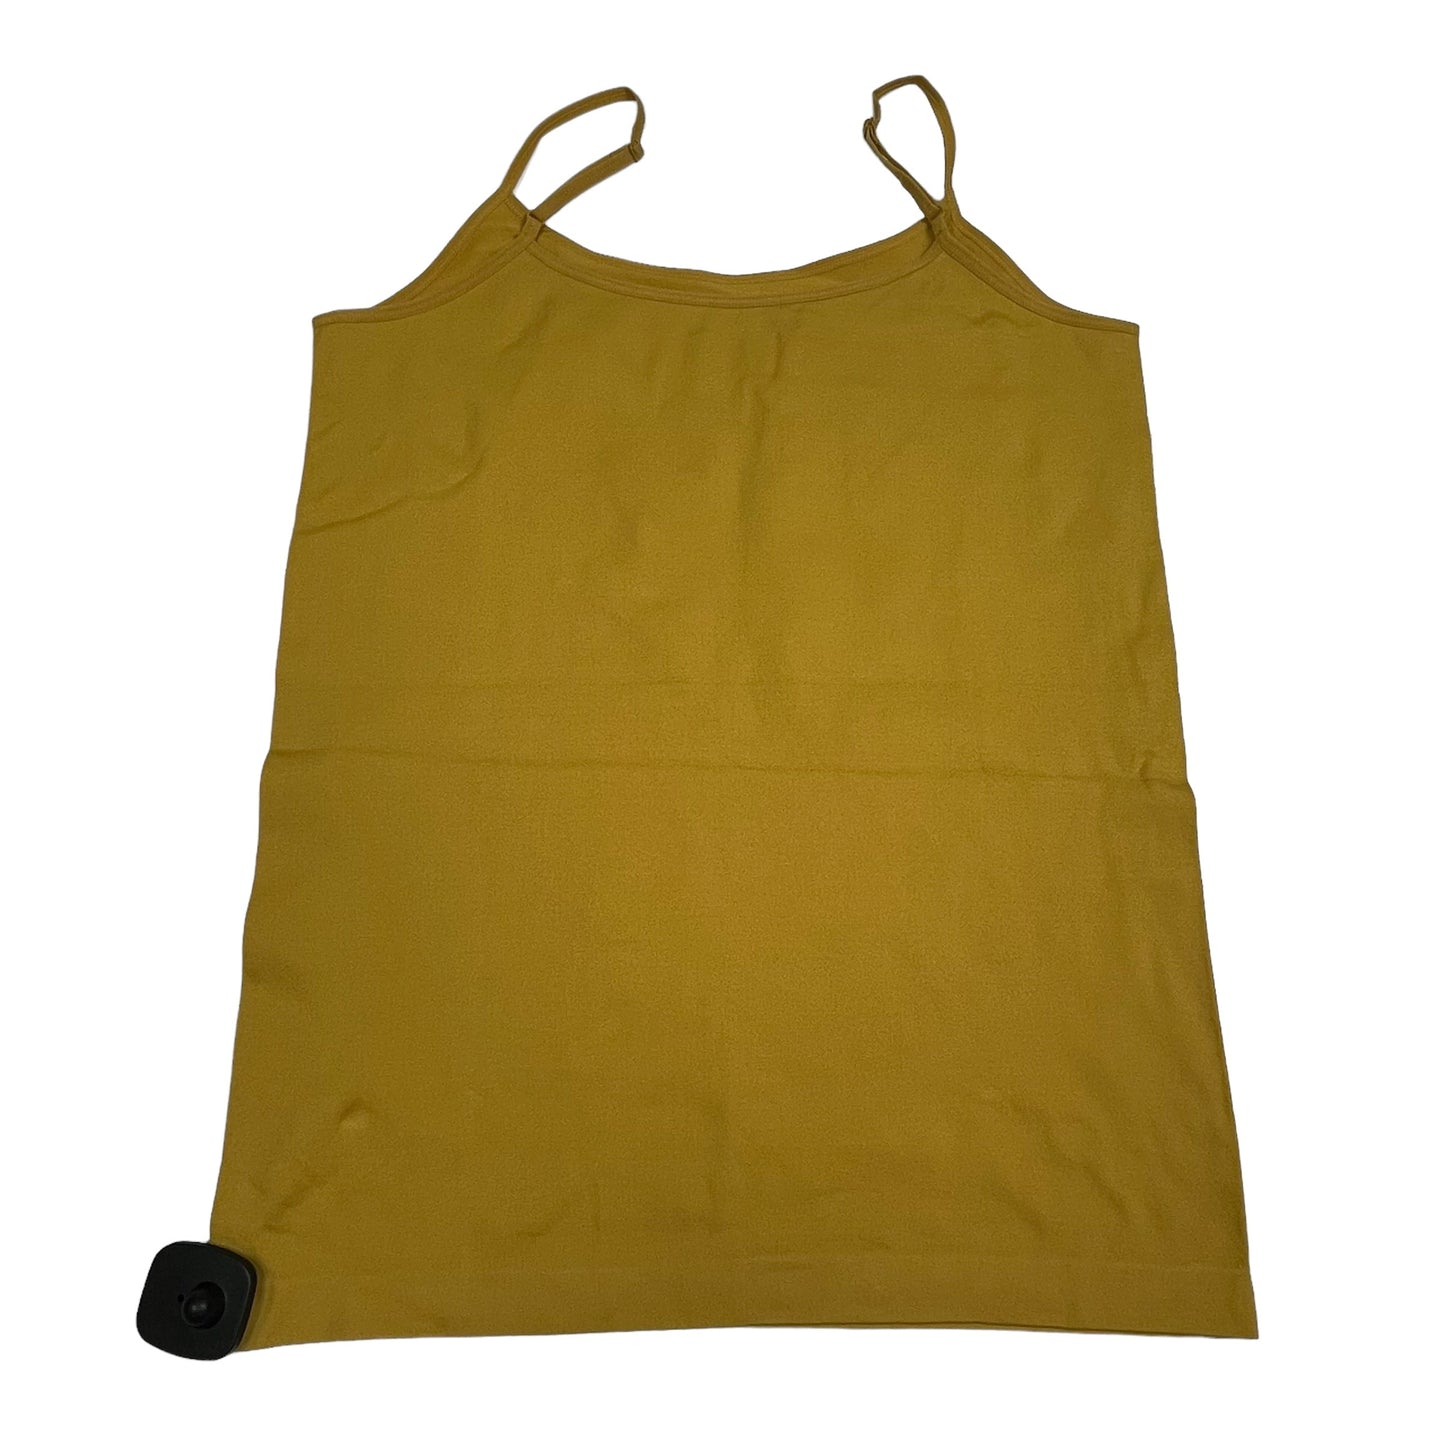 Yellow Top Cami Cato, Size Xl